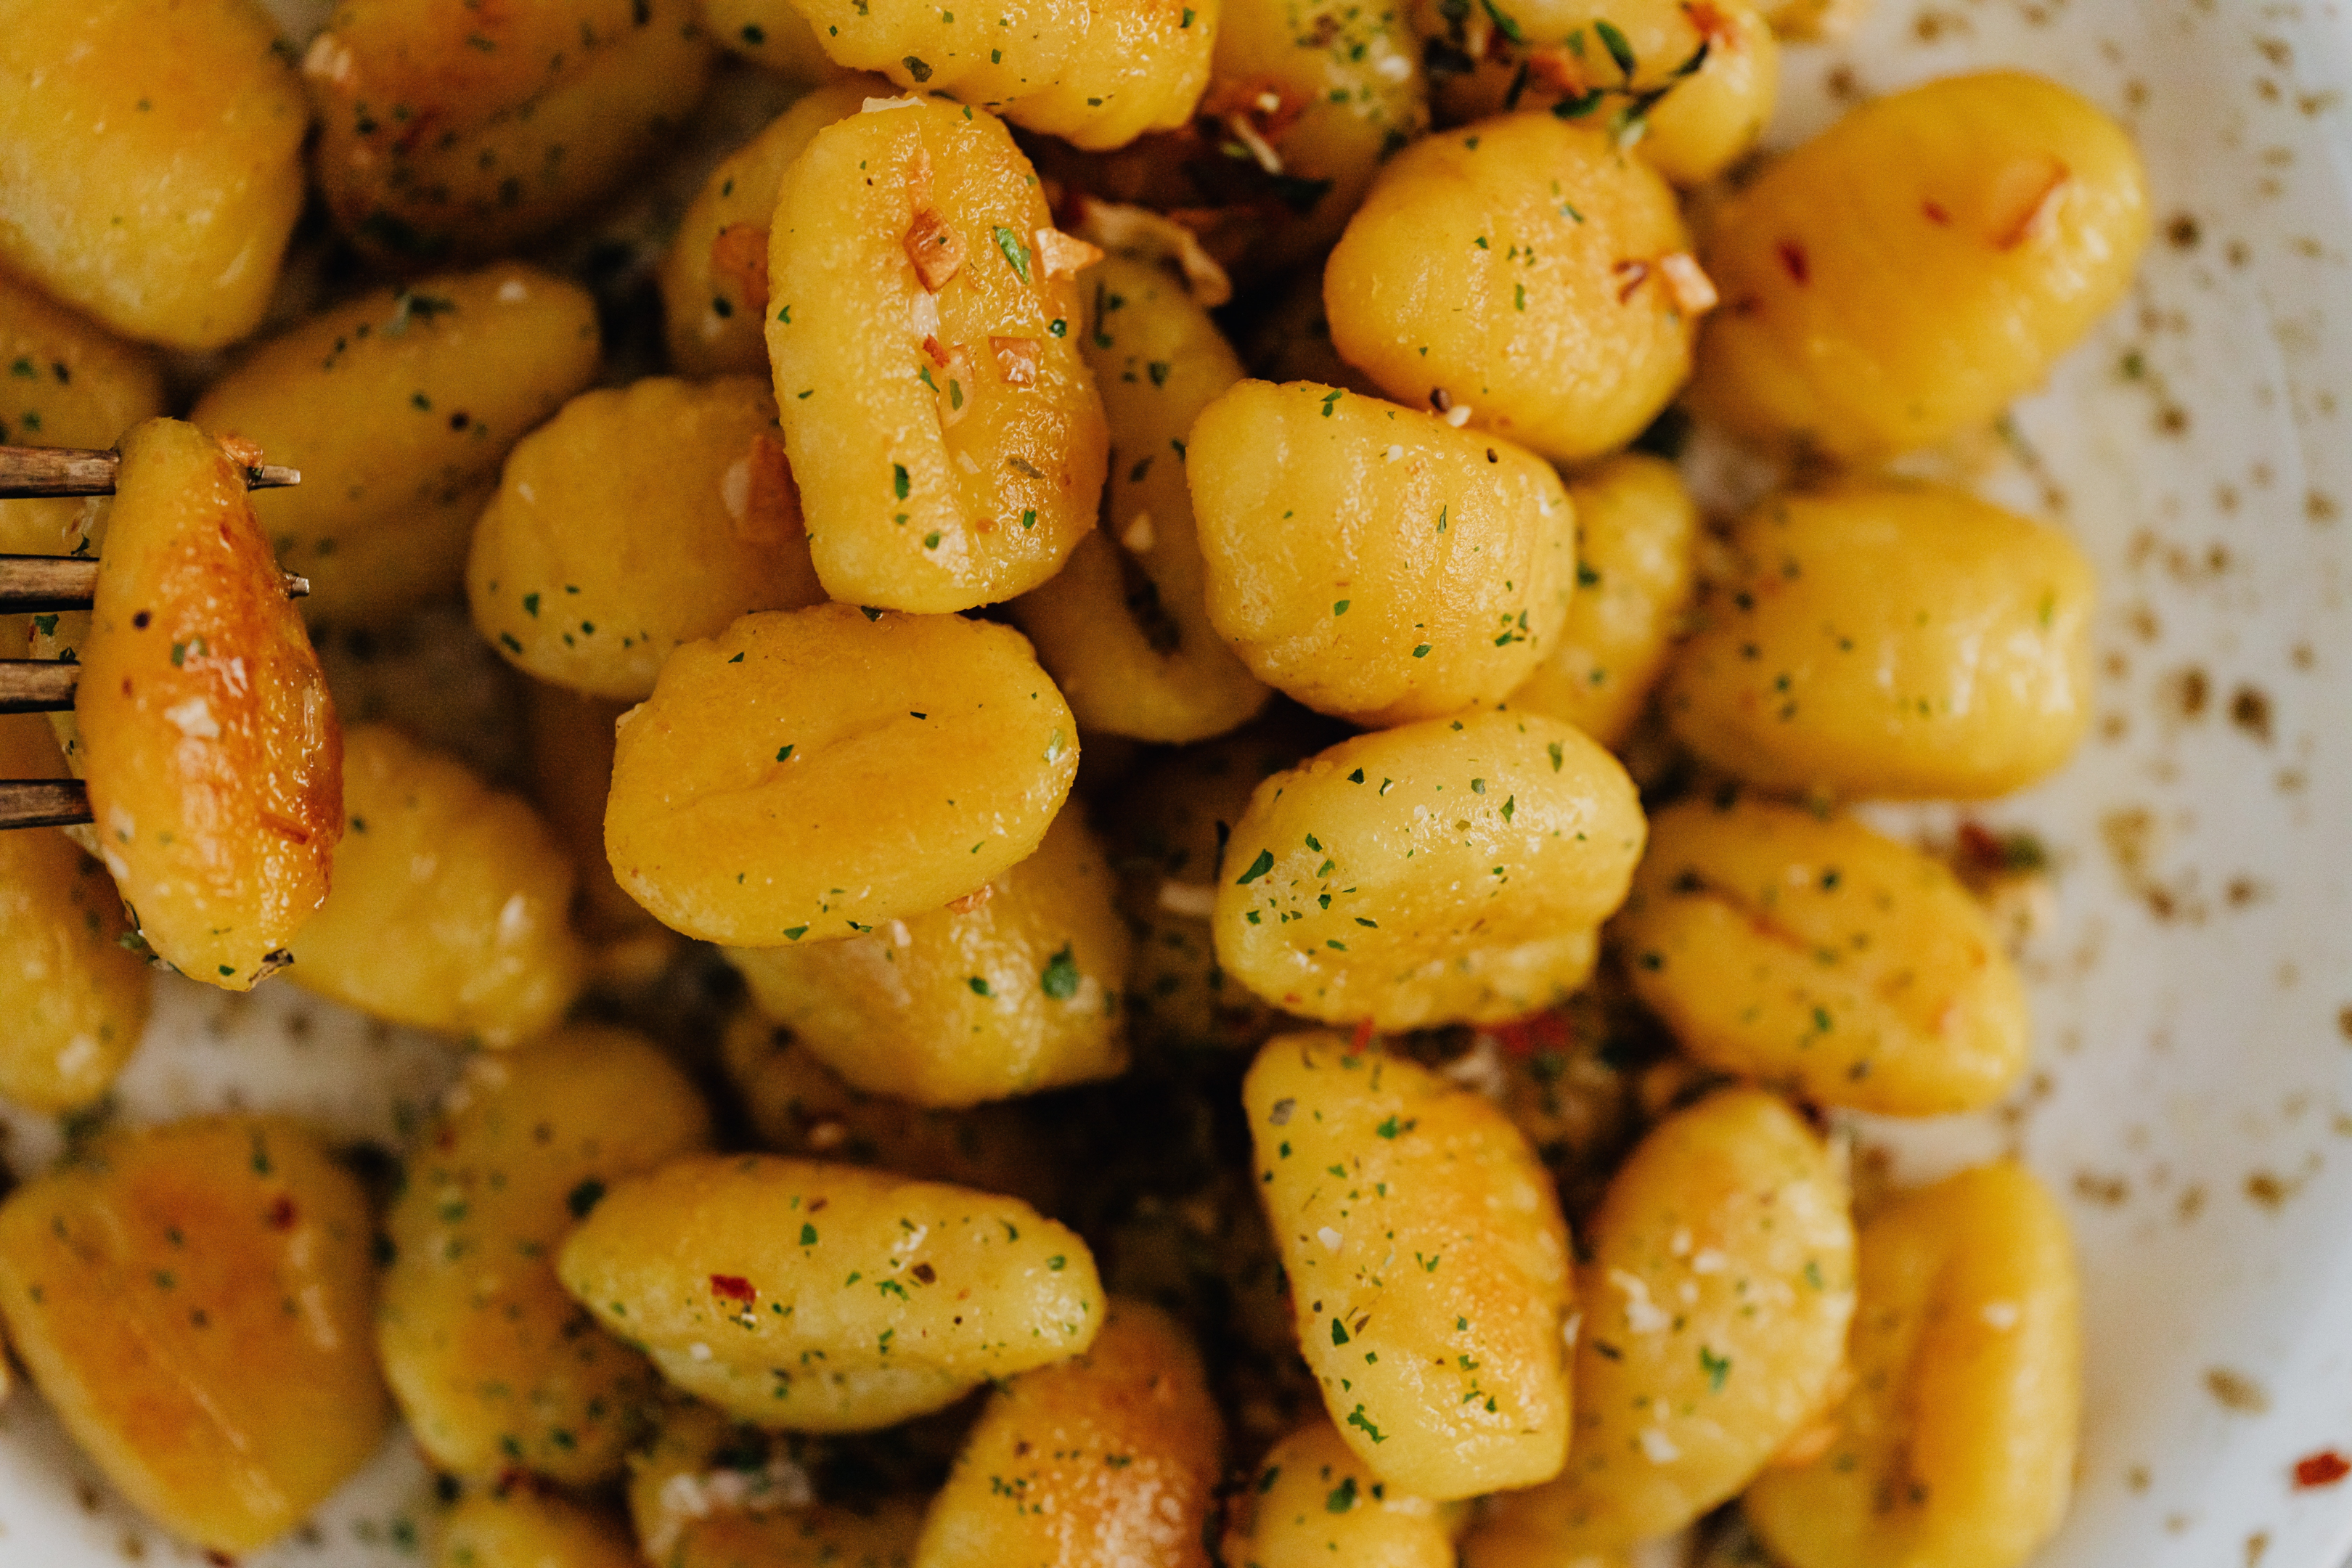 Image source: https://www.pexels.com/photo/gnocchi-dish-in-close-up-shot-6659625/     Caption: Gnocchi with sauce and seasoning